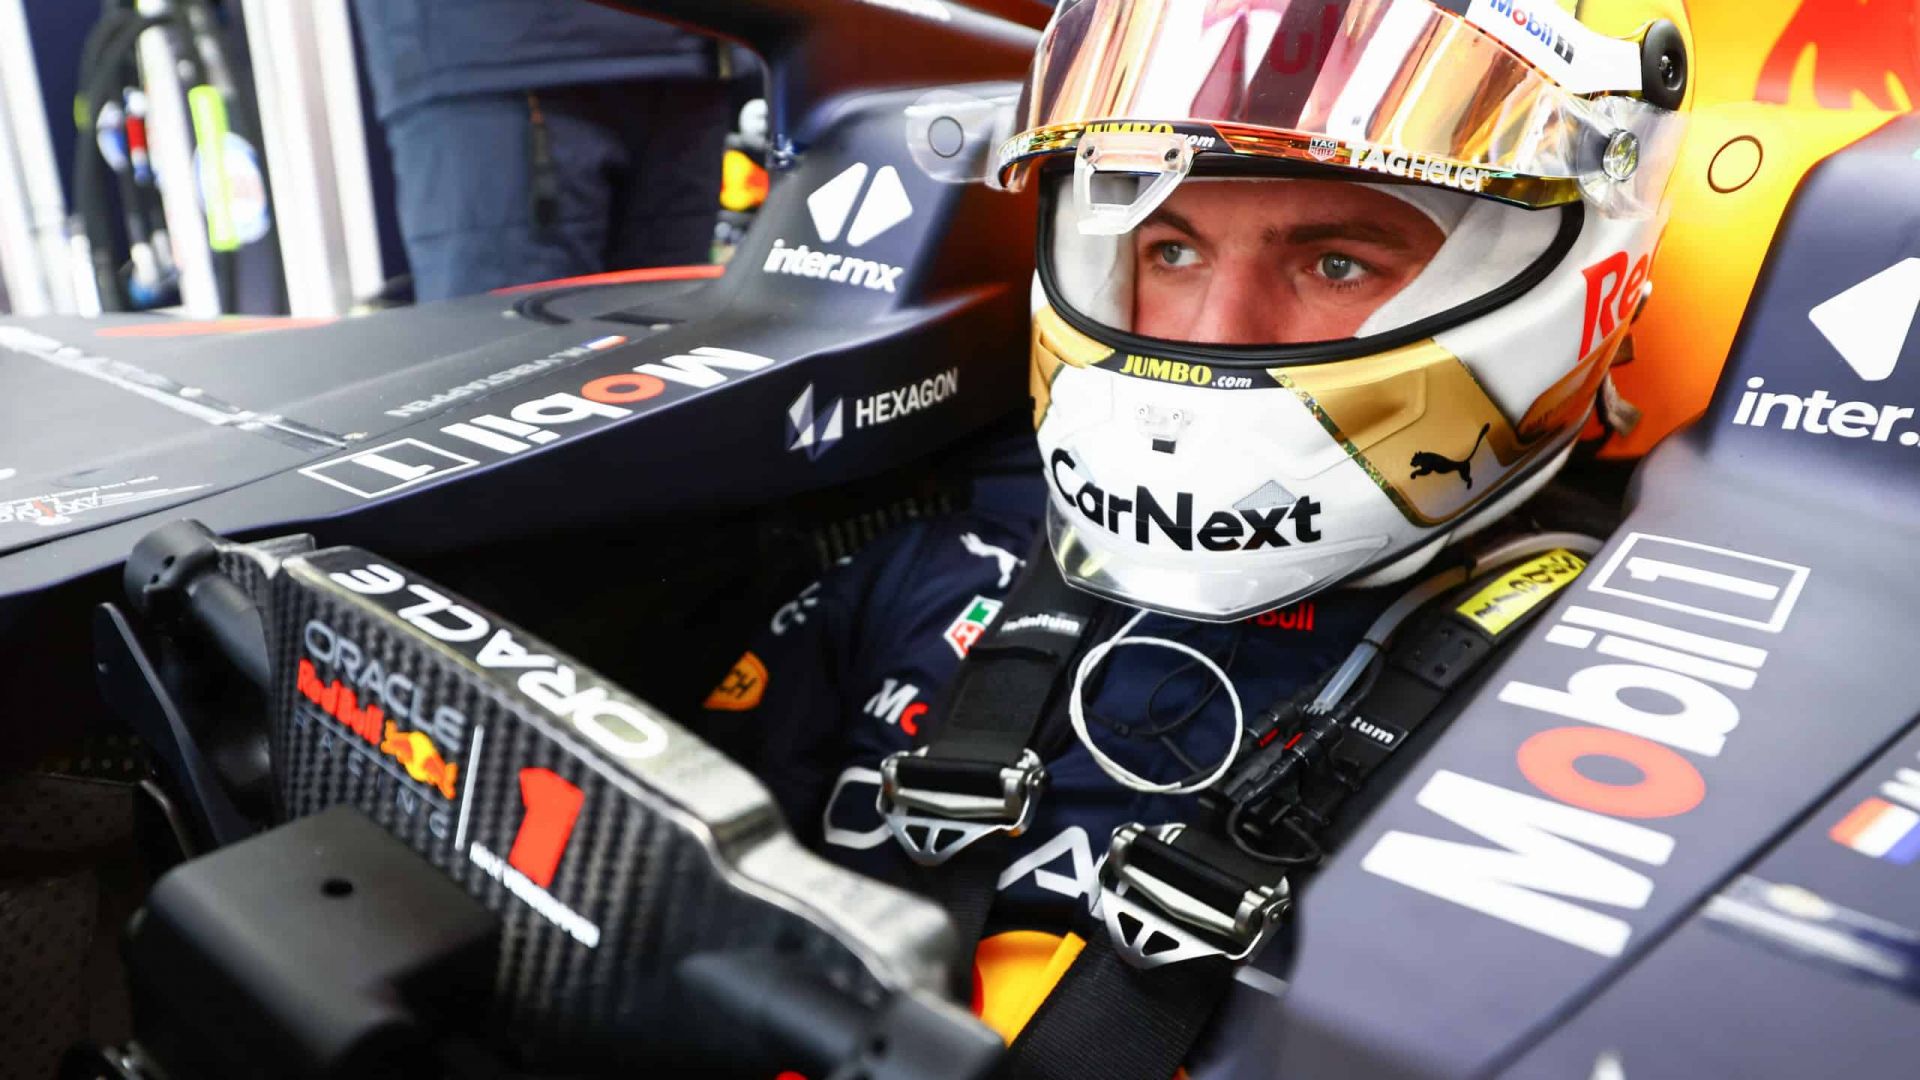 BAHRAIN, BAHRAIN - MARCH 18: Max Verstappen of the Netherlands and Oracle Red Bull Racing prepares to drive in the garage during practice ahead of the F1 Grand Prix of Bahrain at Bahrain International Circuit on March 18, 2022 in Bahrain, Bahrain. (Photo by Mark Thompson/Getty Images) // Getty Images / Red Bull Content Pool // SI202203180248 // Usage for editorial use only //